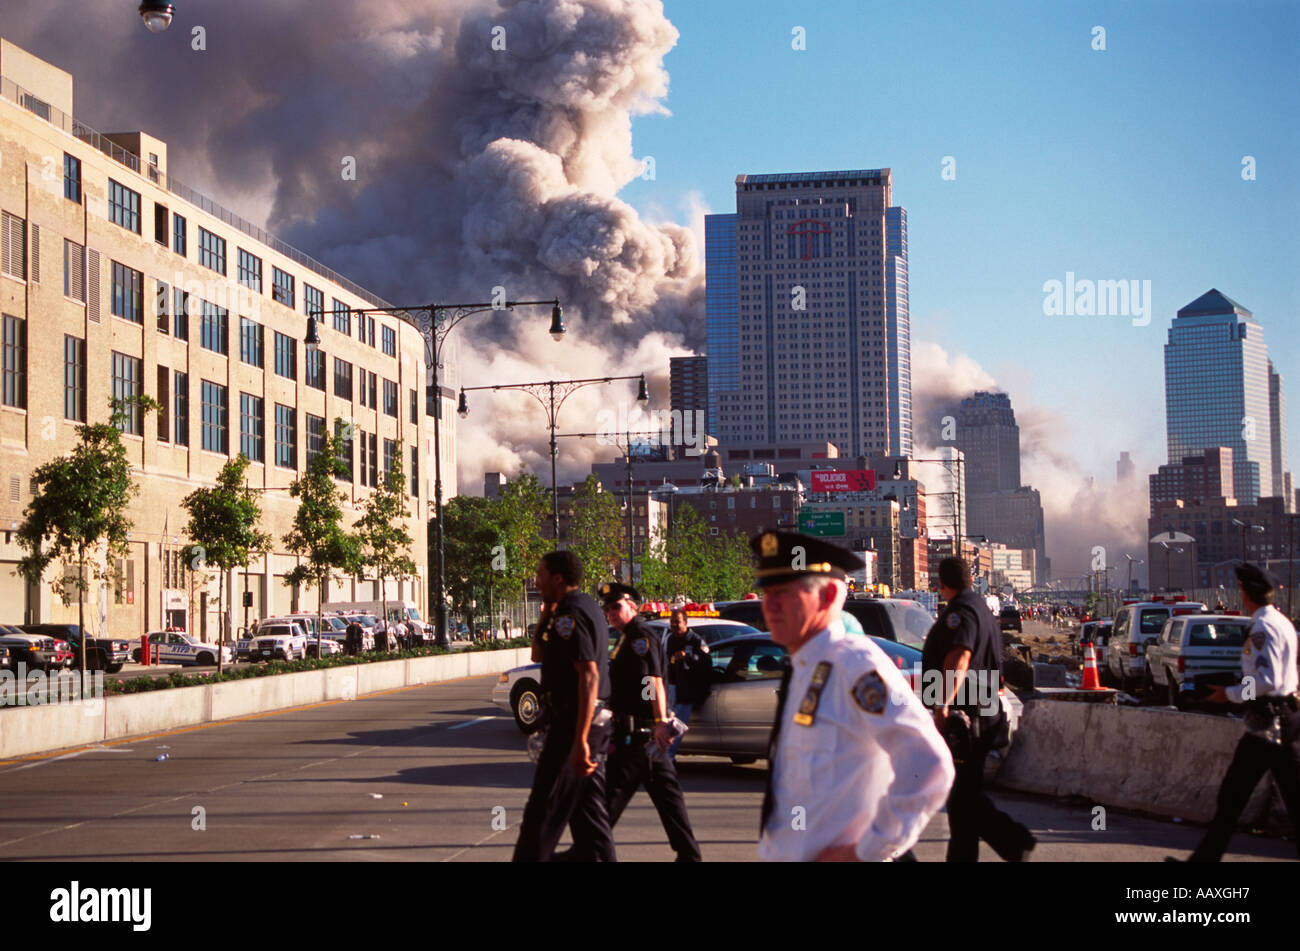 The collapse of the WTC 7 building on September 11th as seen from the west side highway in NYC. Stock Photo